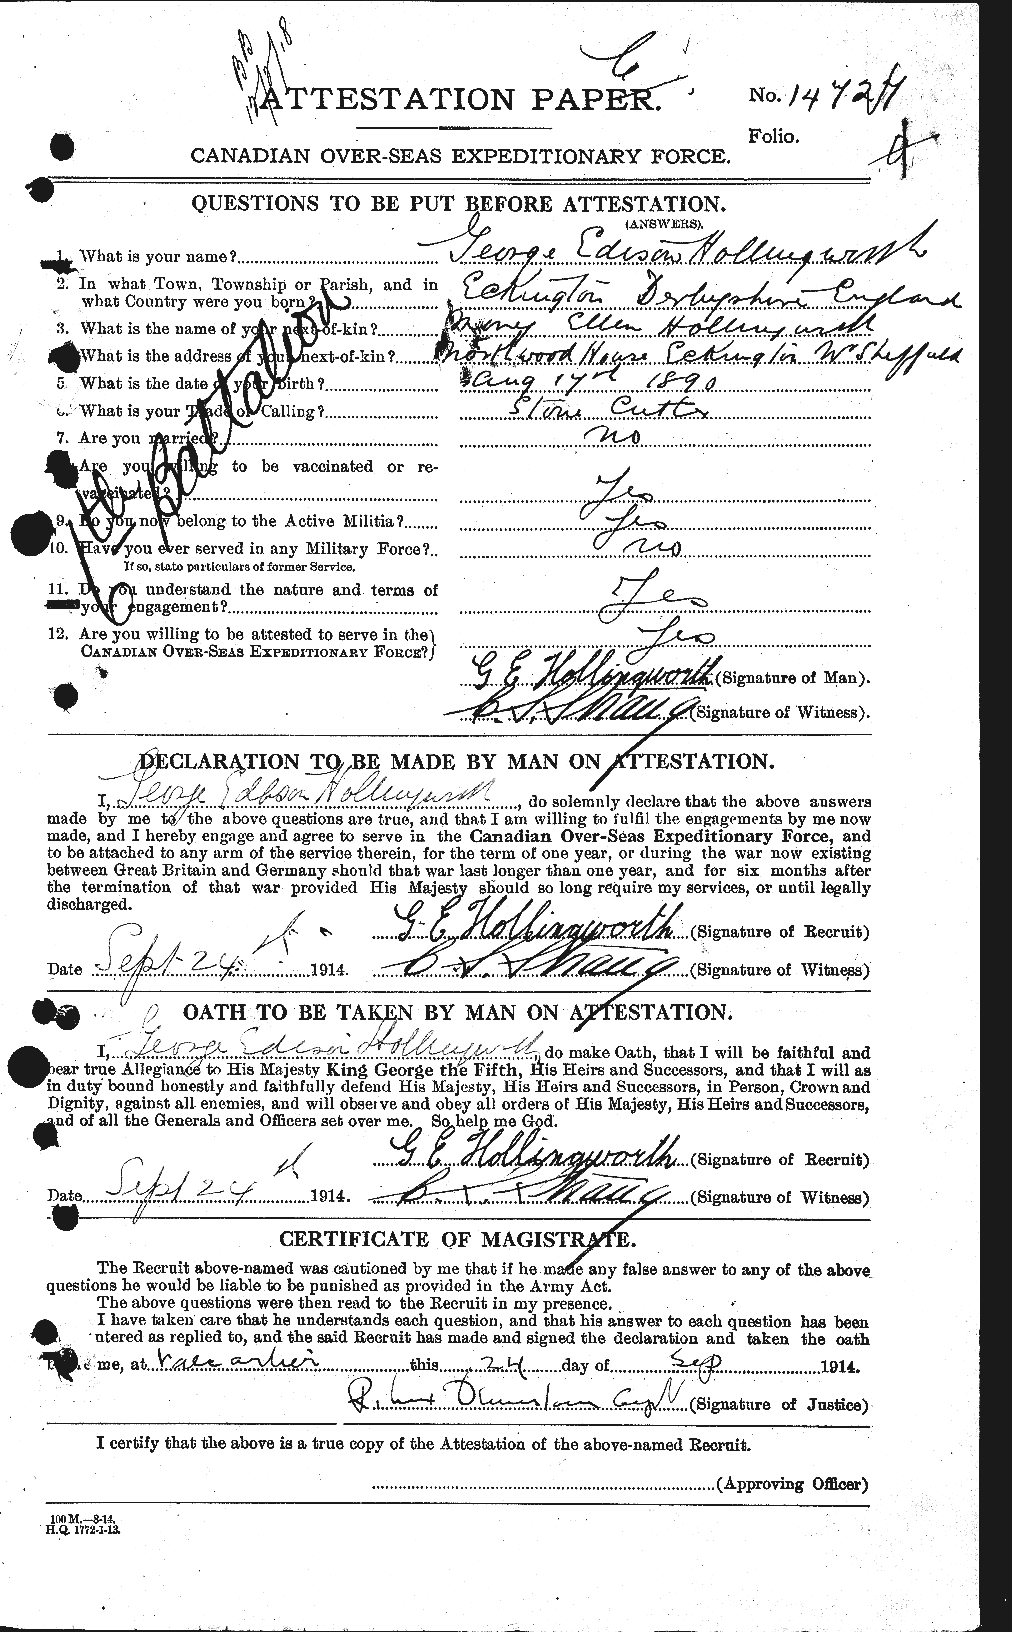 Personnel Records of the First World War - CEF 398216a